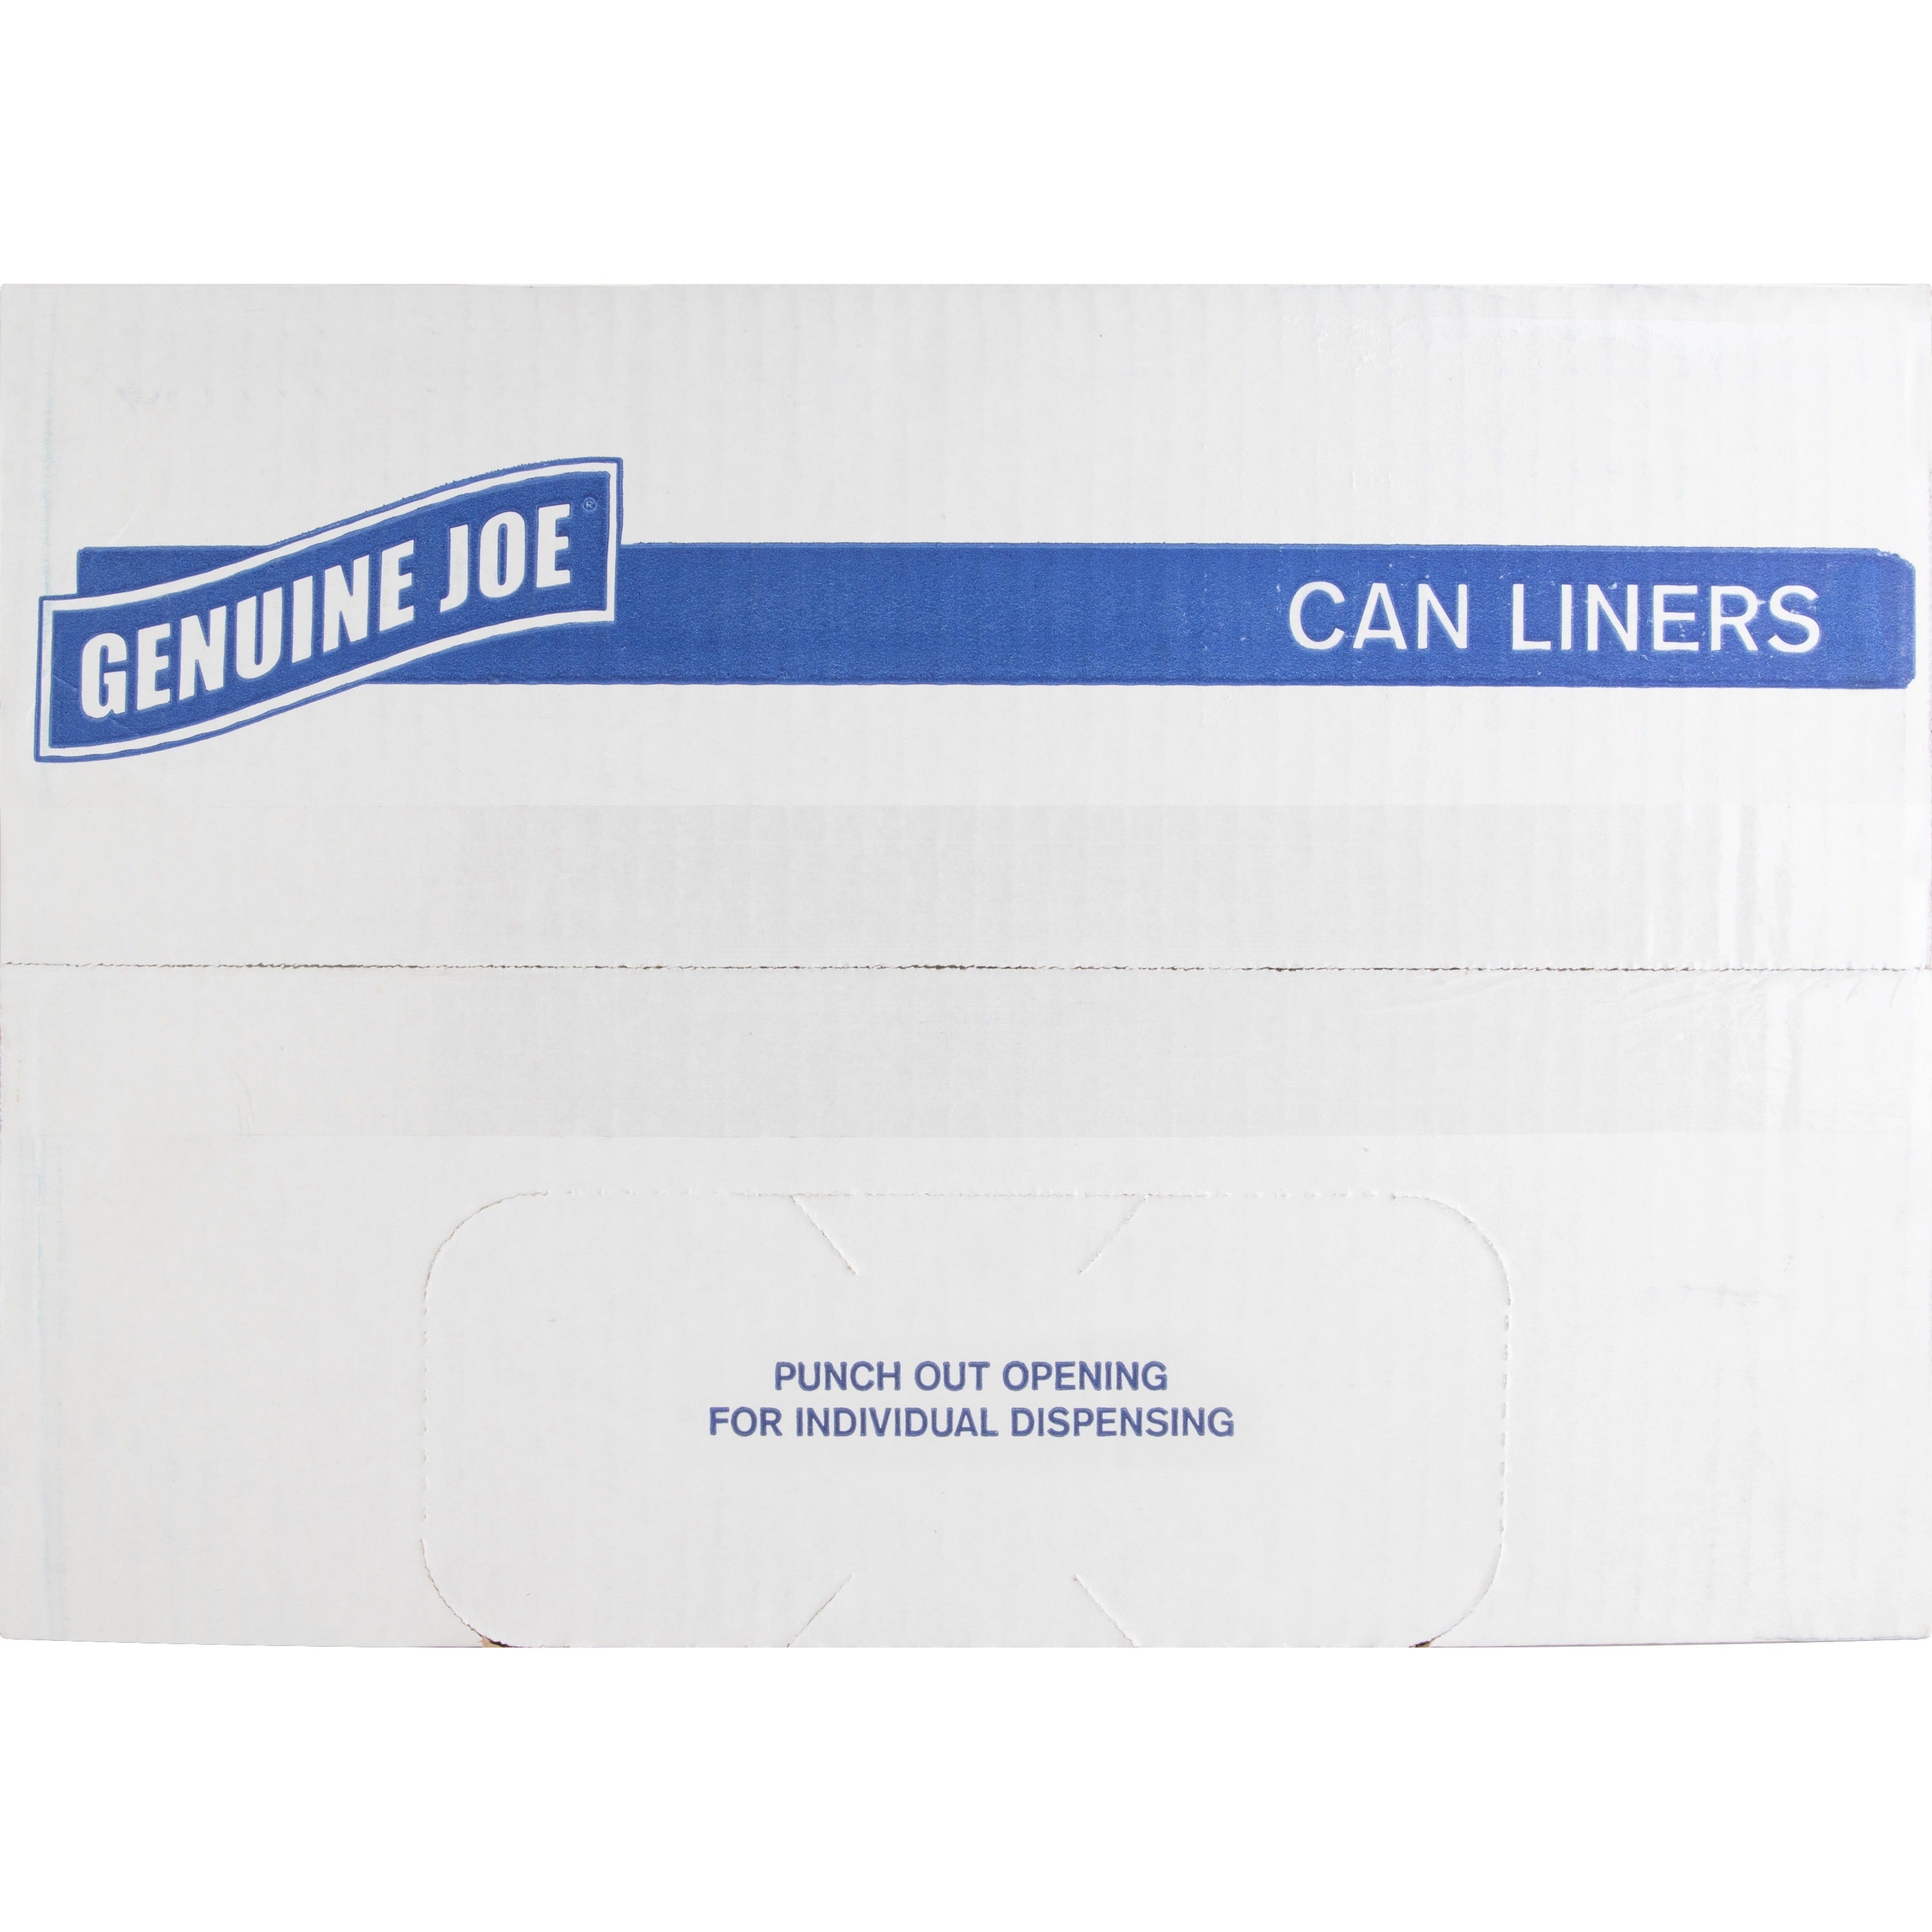 Genuine Joe Linear Low Density Can Liners - Large Size - 45 gal Capacity - 40" Width x 46" Length - 0.60 mil (15 Micron) Thickness - Low Density - Brown, Black - 250/Carton - 